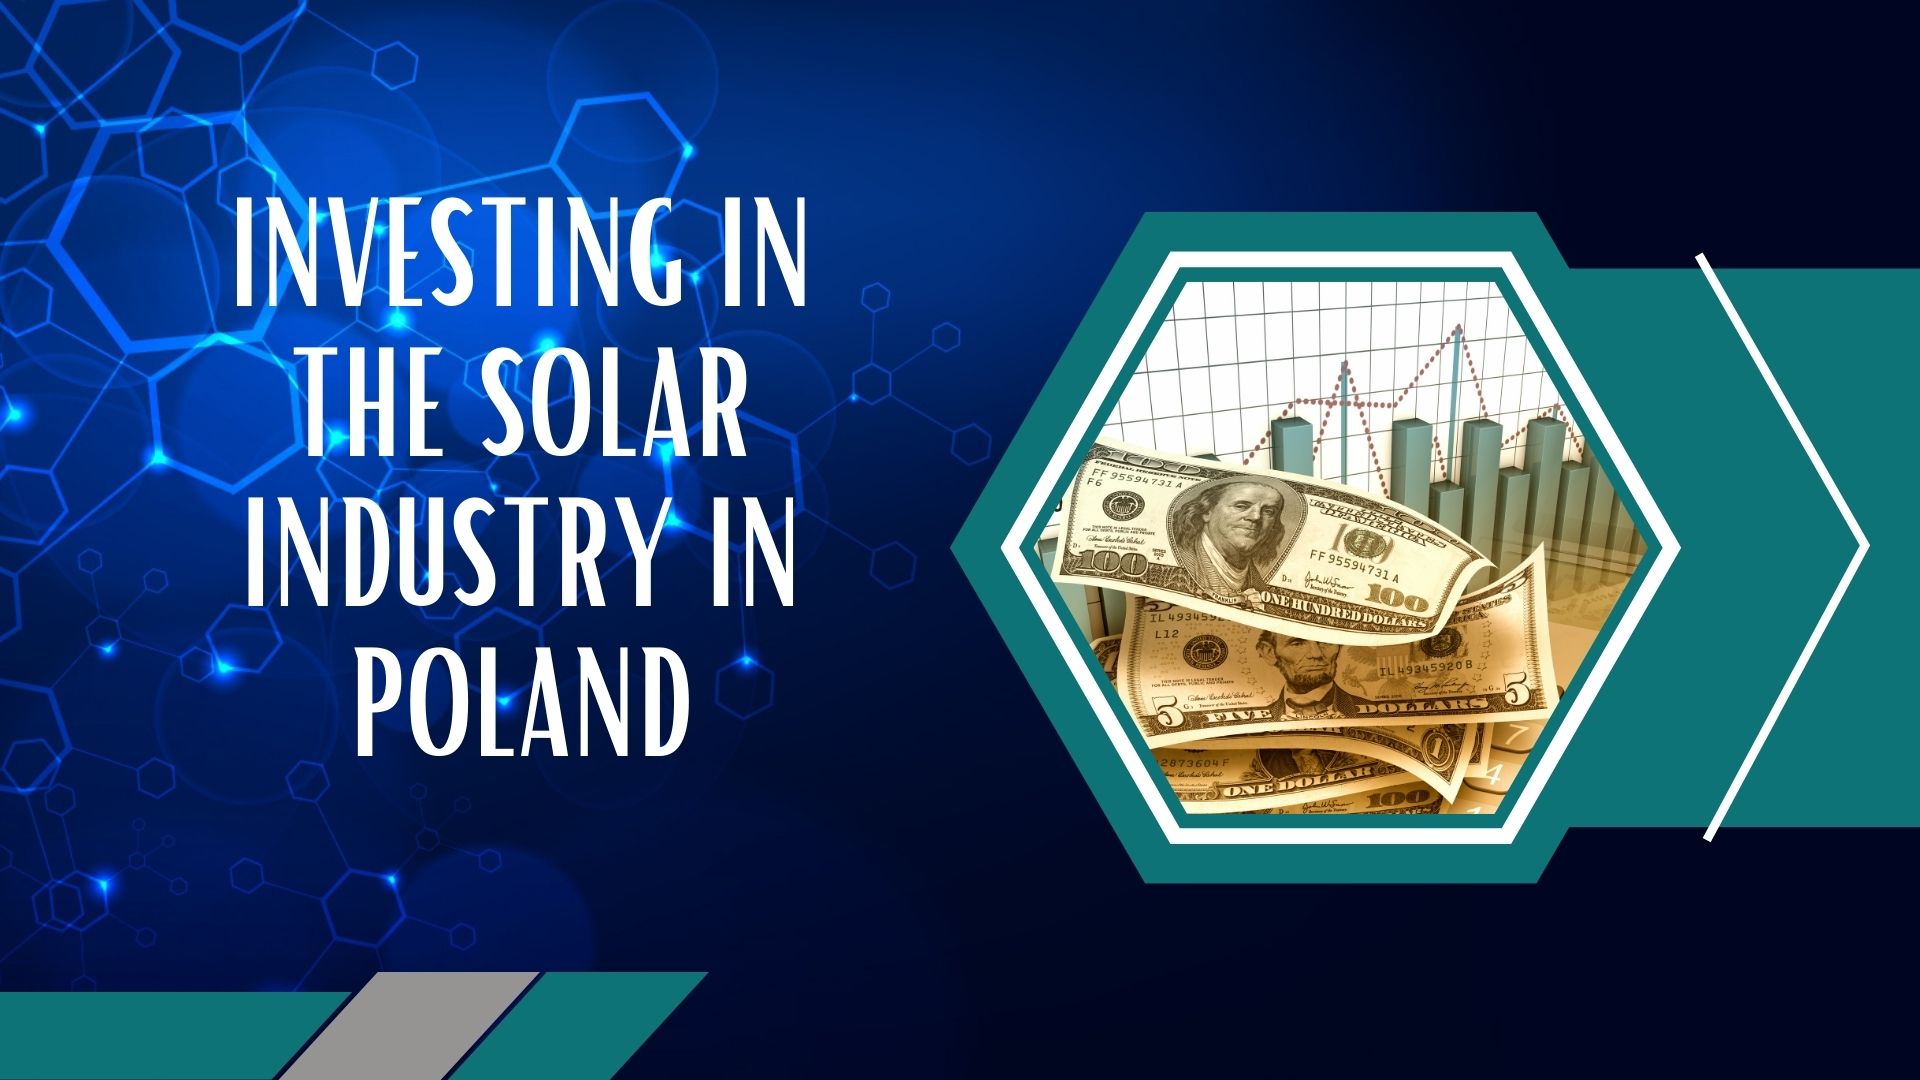 Investing in the solar industry in Poland